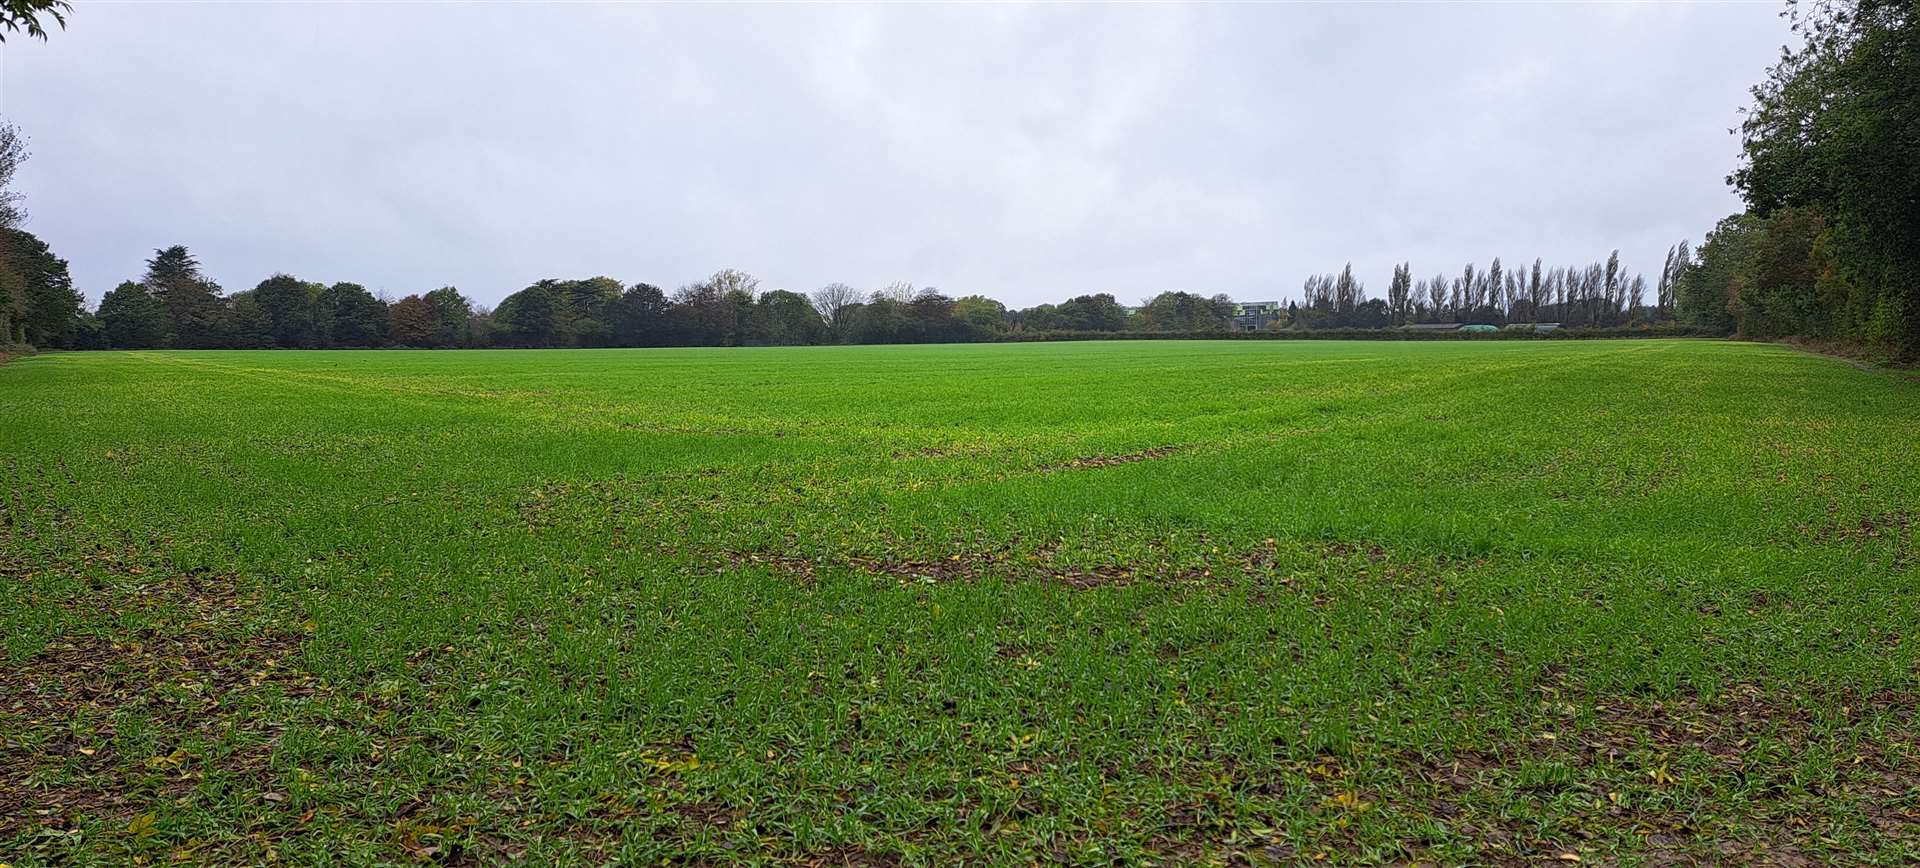 Part of the proposed development site off Pested Bars Road, Maidstone